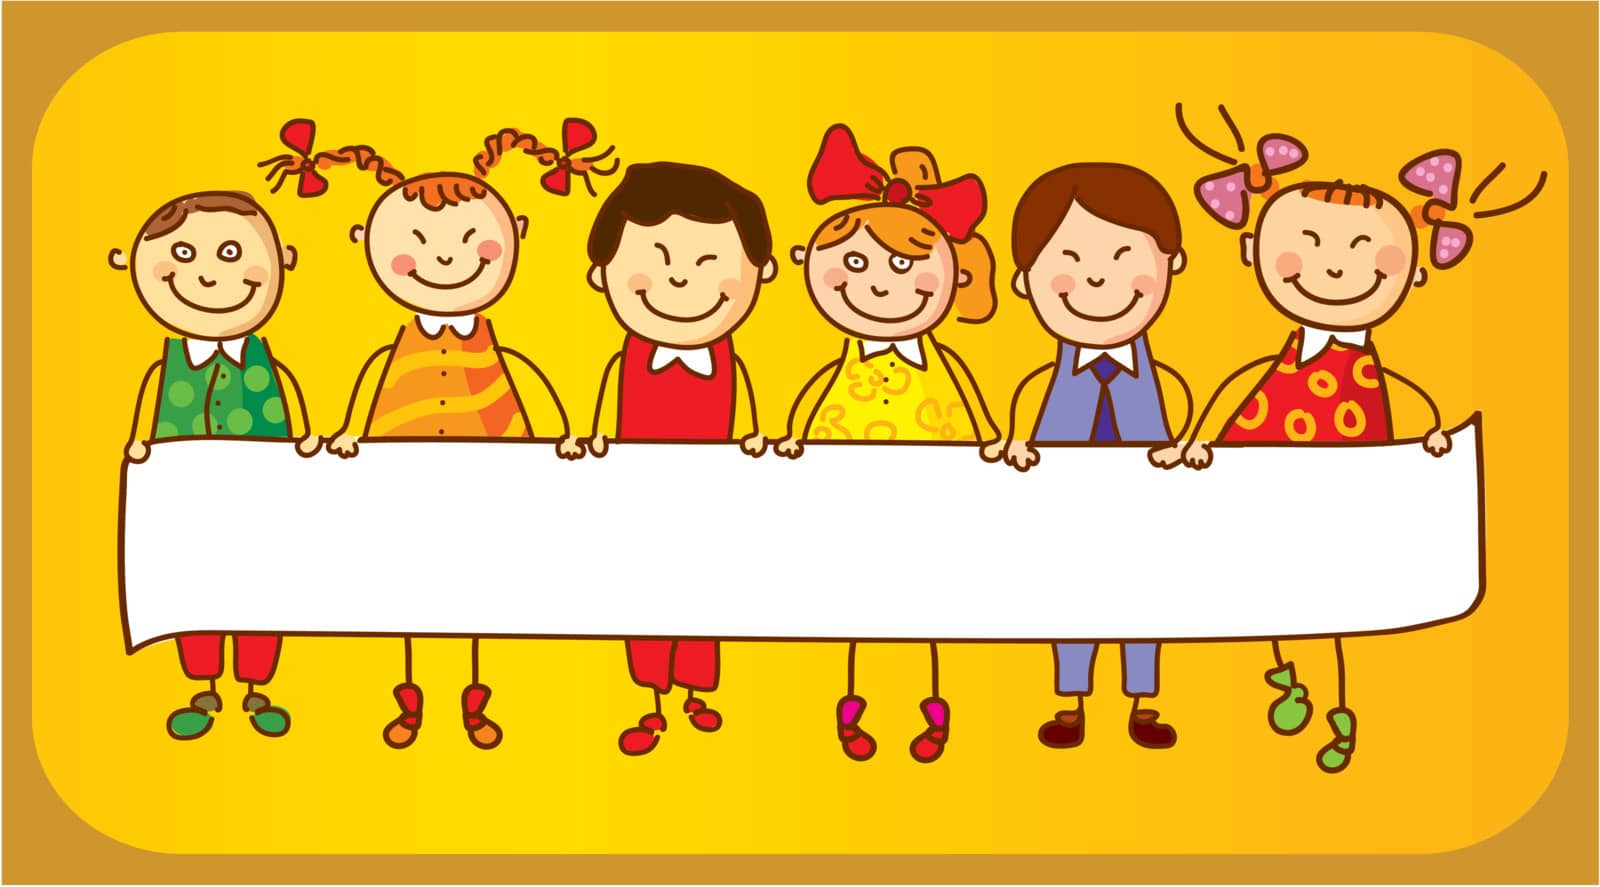 Six cute kids holding a sign on yellow background